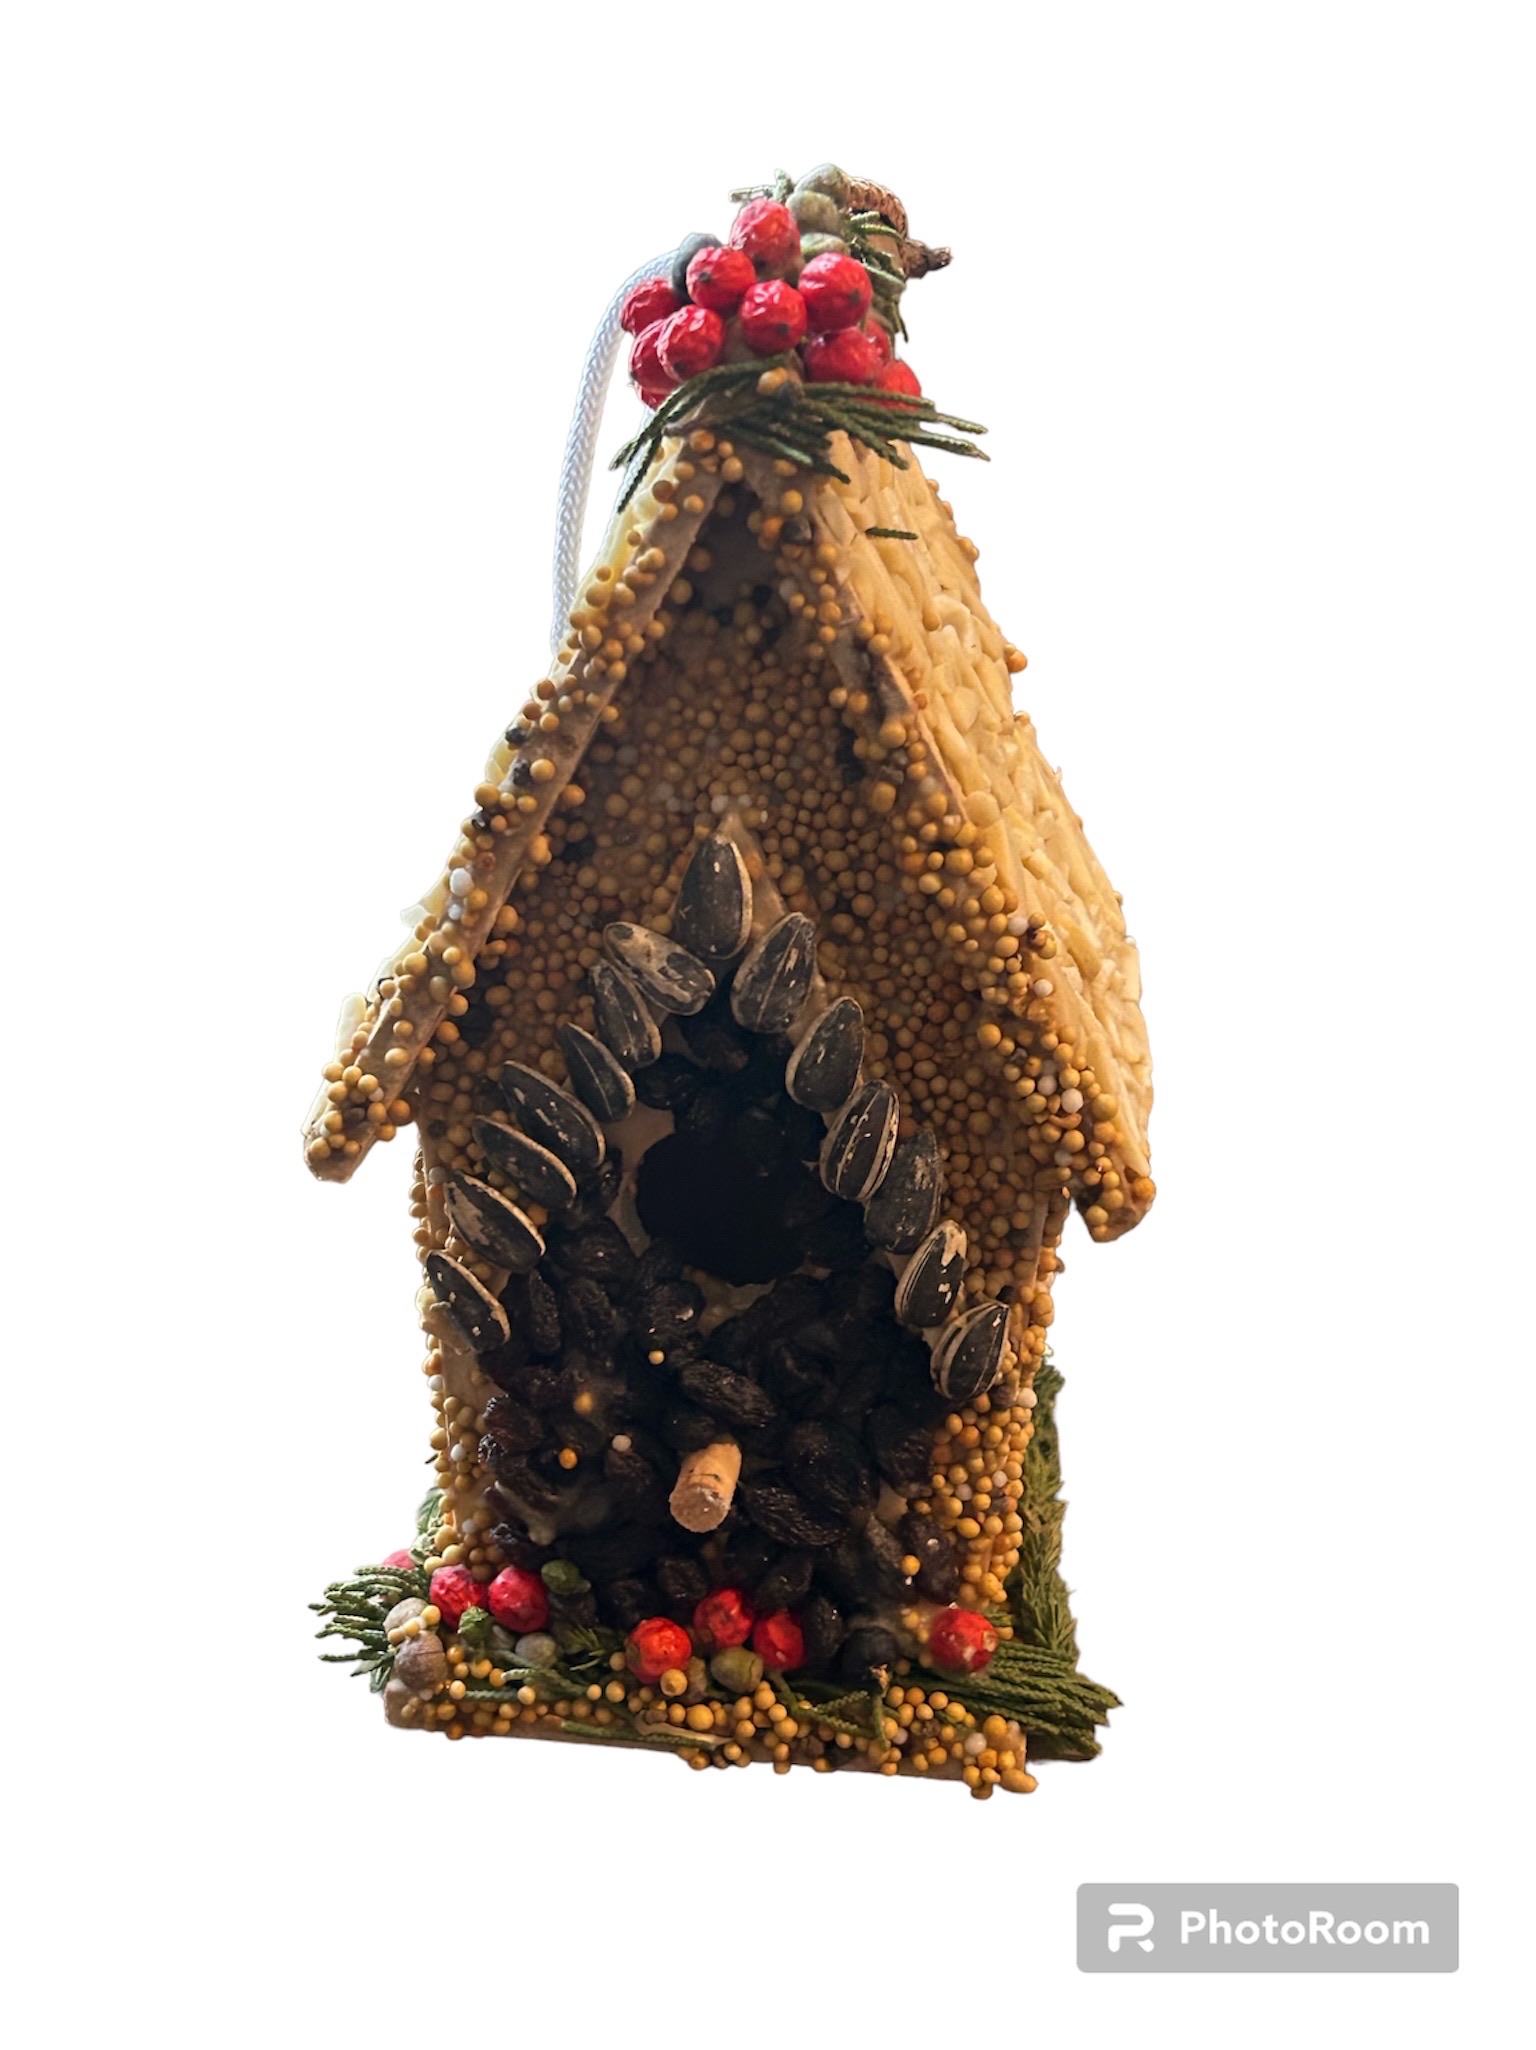 Image of a small brown birdhouse, decorated with seeds, nuts and berries